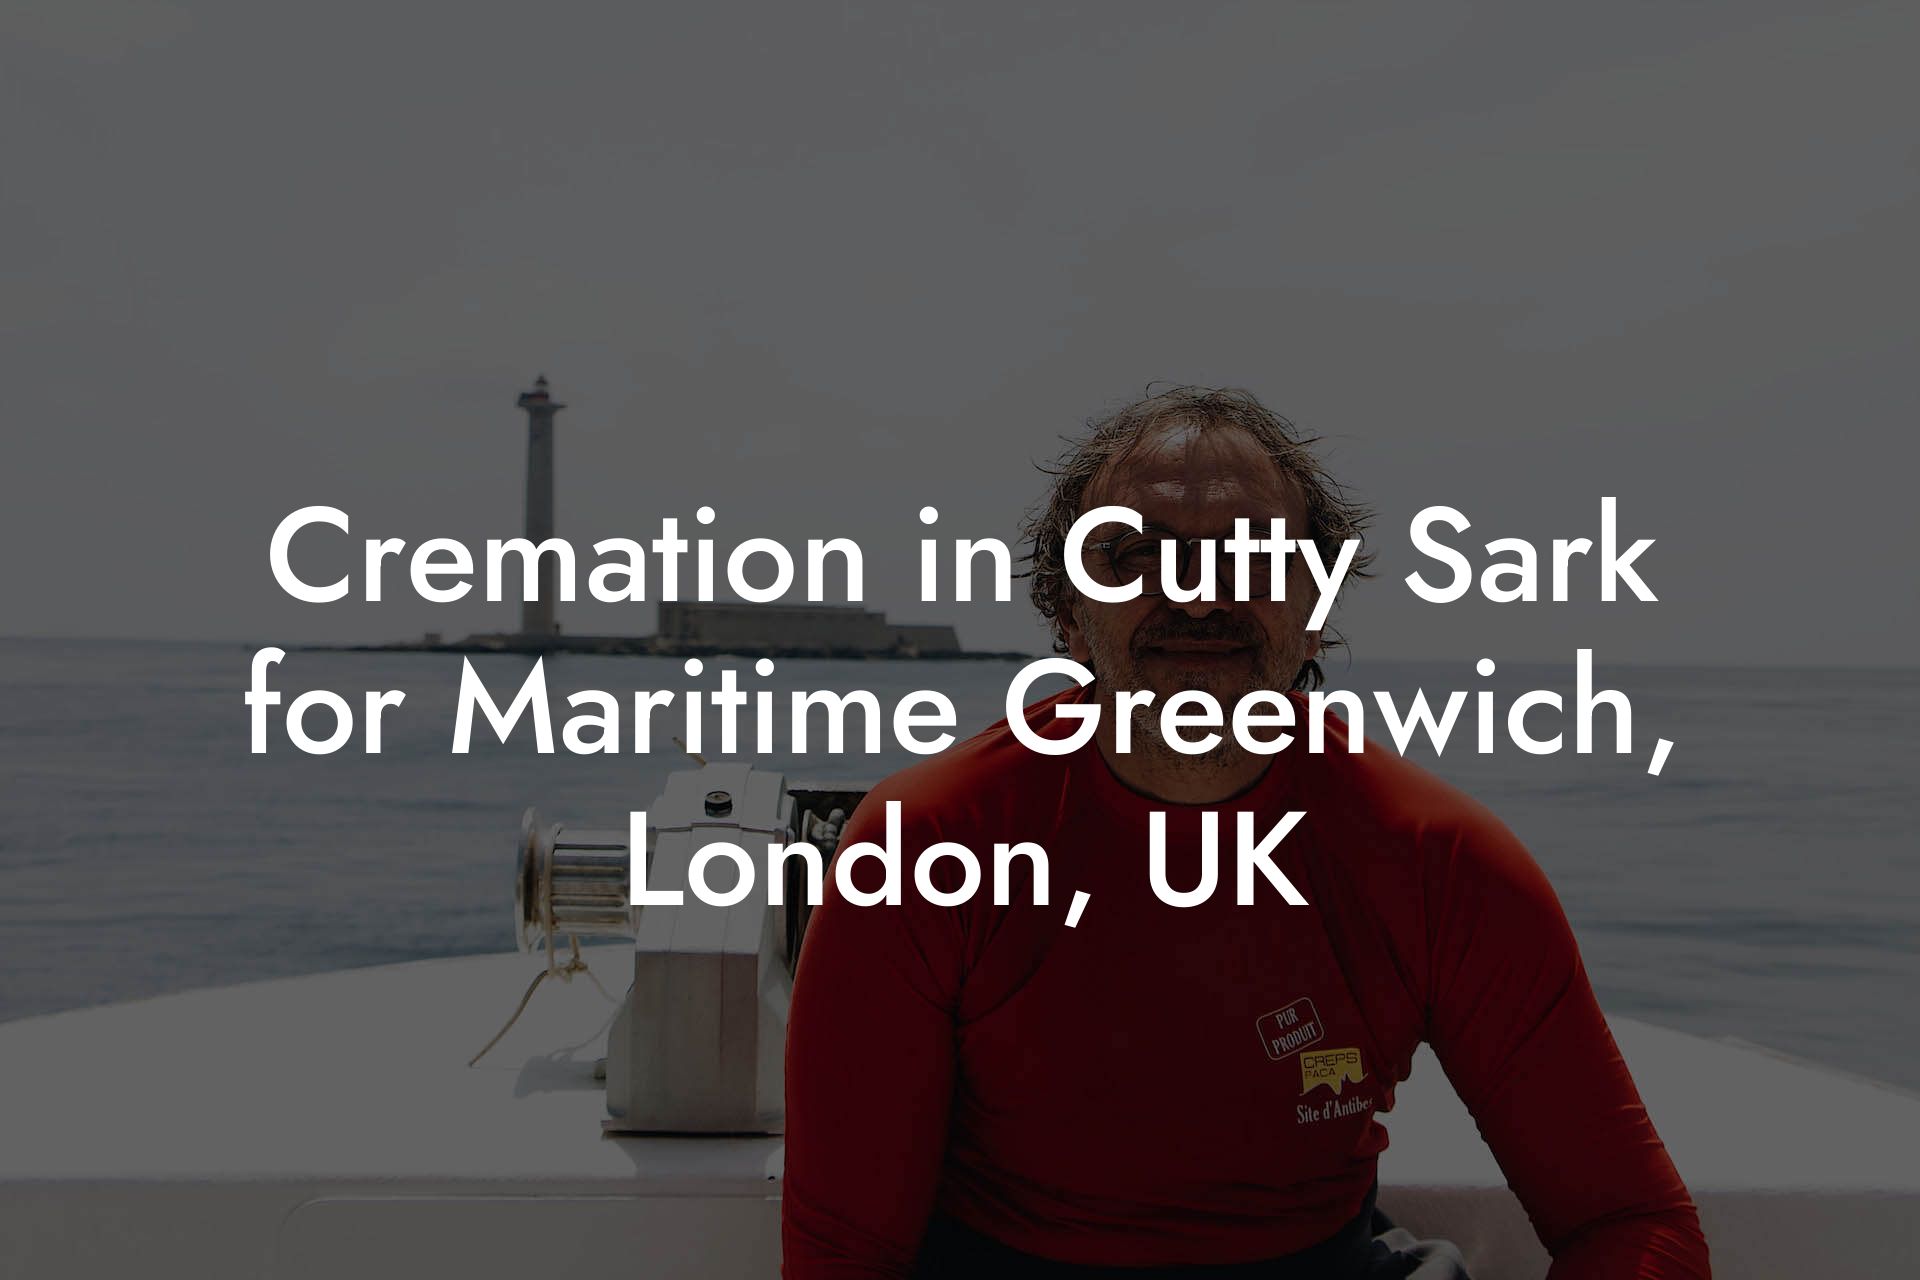 Cremation in Cutty Sark for Maritime Greenwich, London, UK